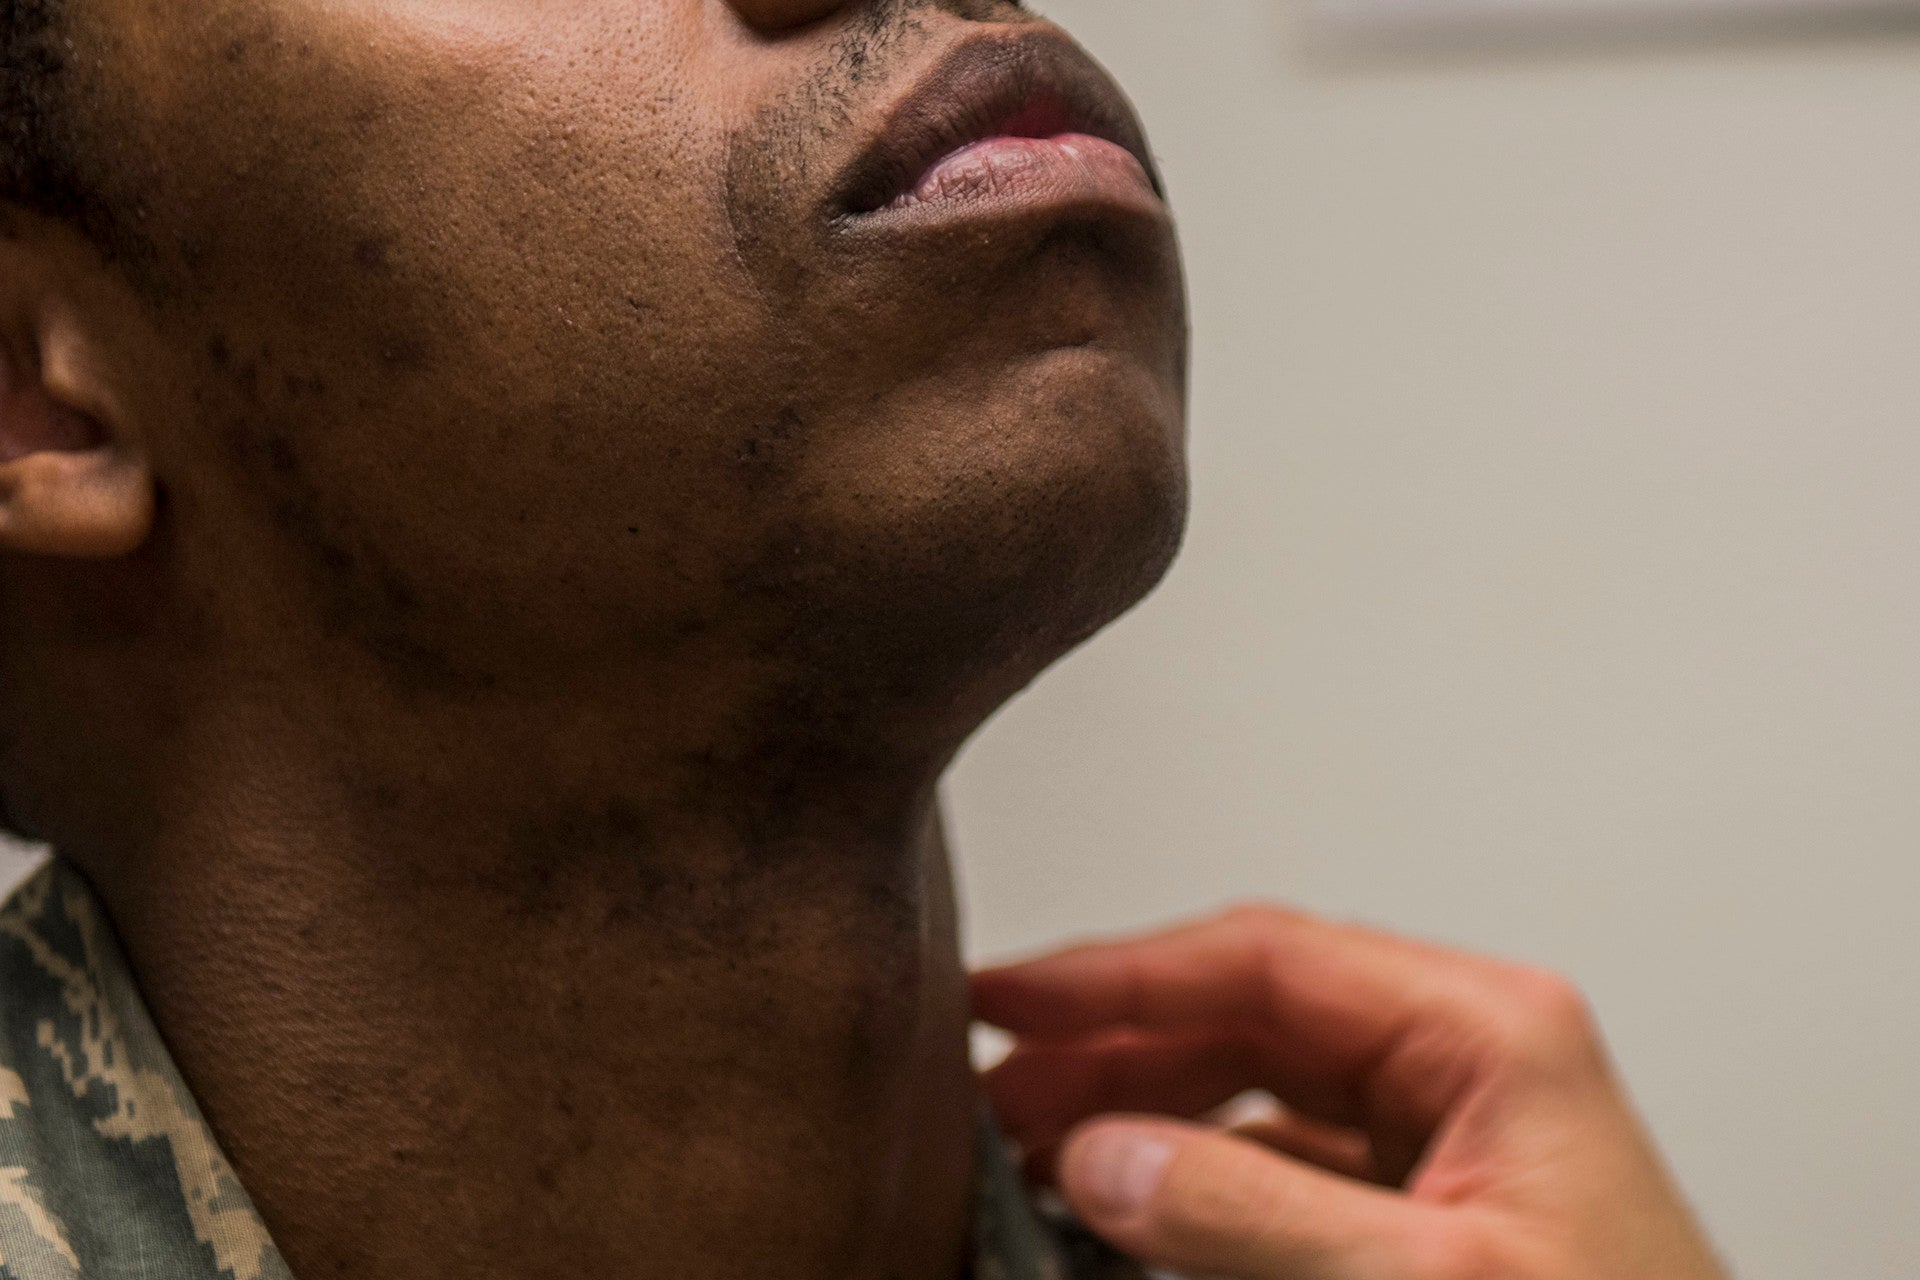 Staff Sgt. Antoine, 13th Intelligence Squadron intelligence analyst, raises his head as Lt. Col. David Gregory, 9th Medical Group flight surgeon chief of medical staff, inspects his neck and face during a shaving waiver course at Beale Air Force Base, California, March 15, 2018. The most common reason Airmen request shaving waivers is due to pseudofolliculitis barbae, or PFB, which is also known as shaving bumps or ingrown hairs.